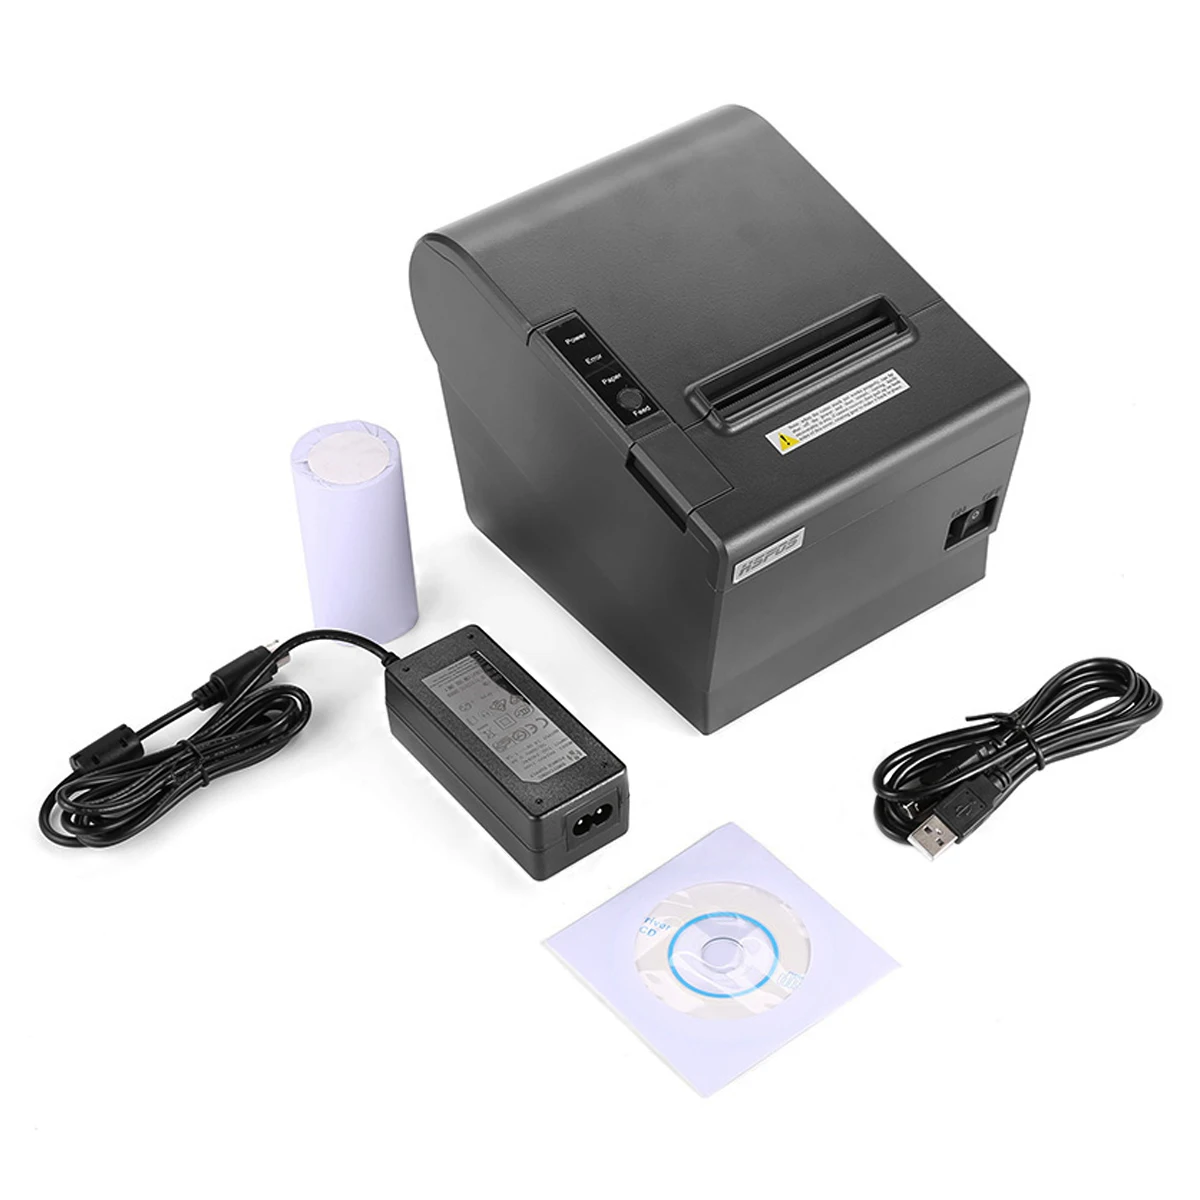 

80mm Thermal Receipt Printer with auto cutter for Commercial Retail Store with USB+LAN port HS-802